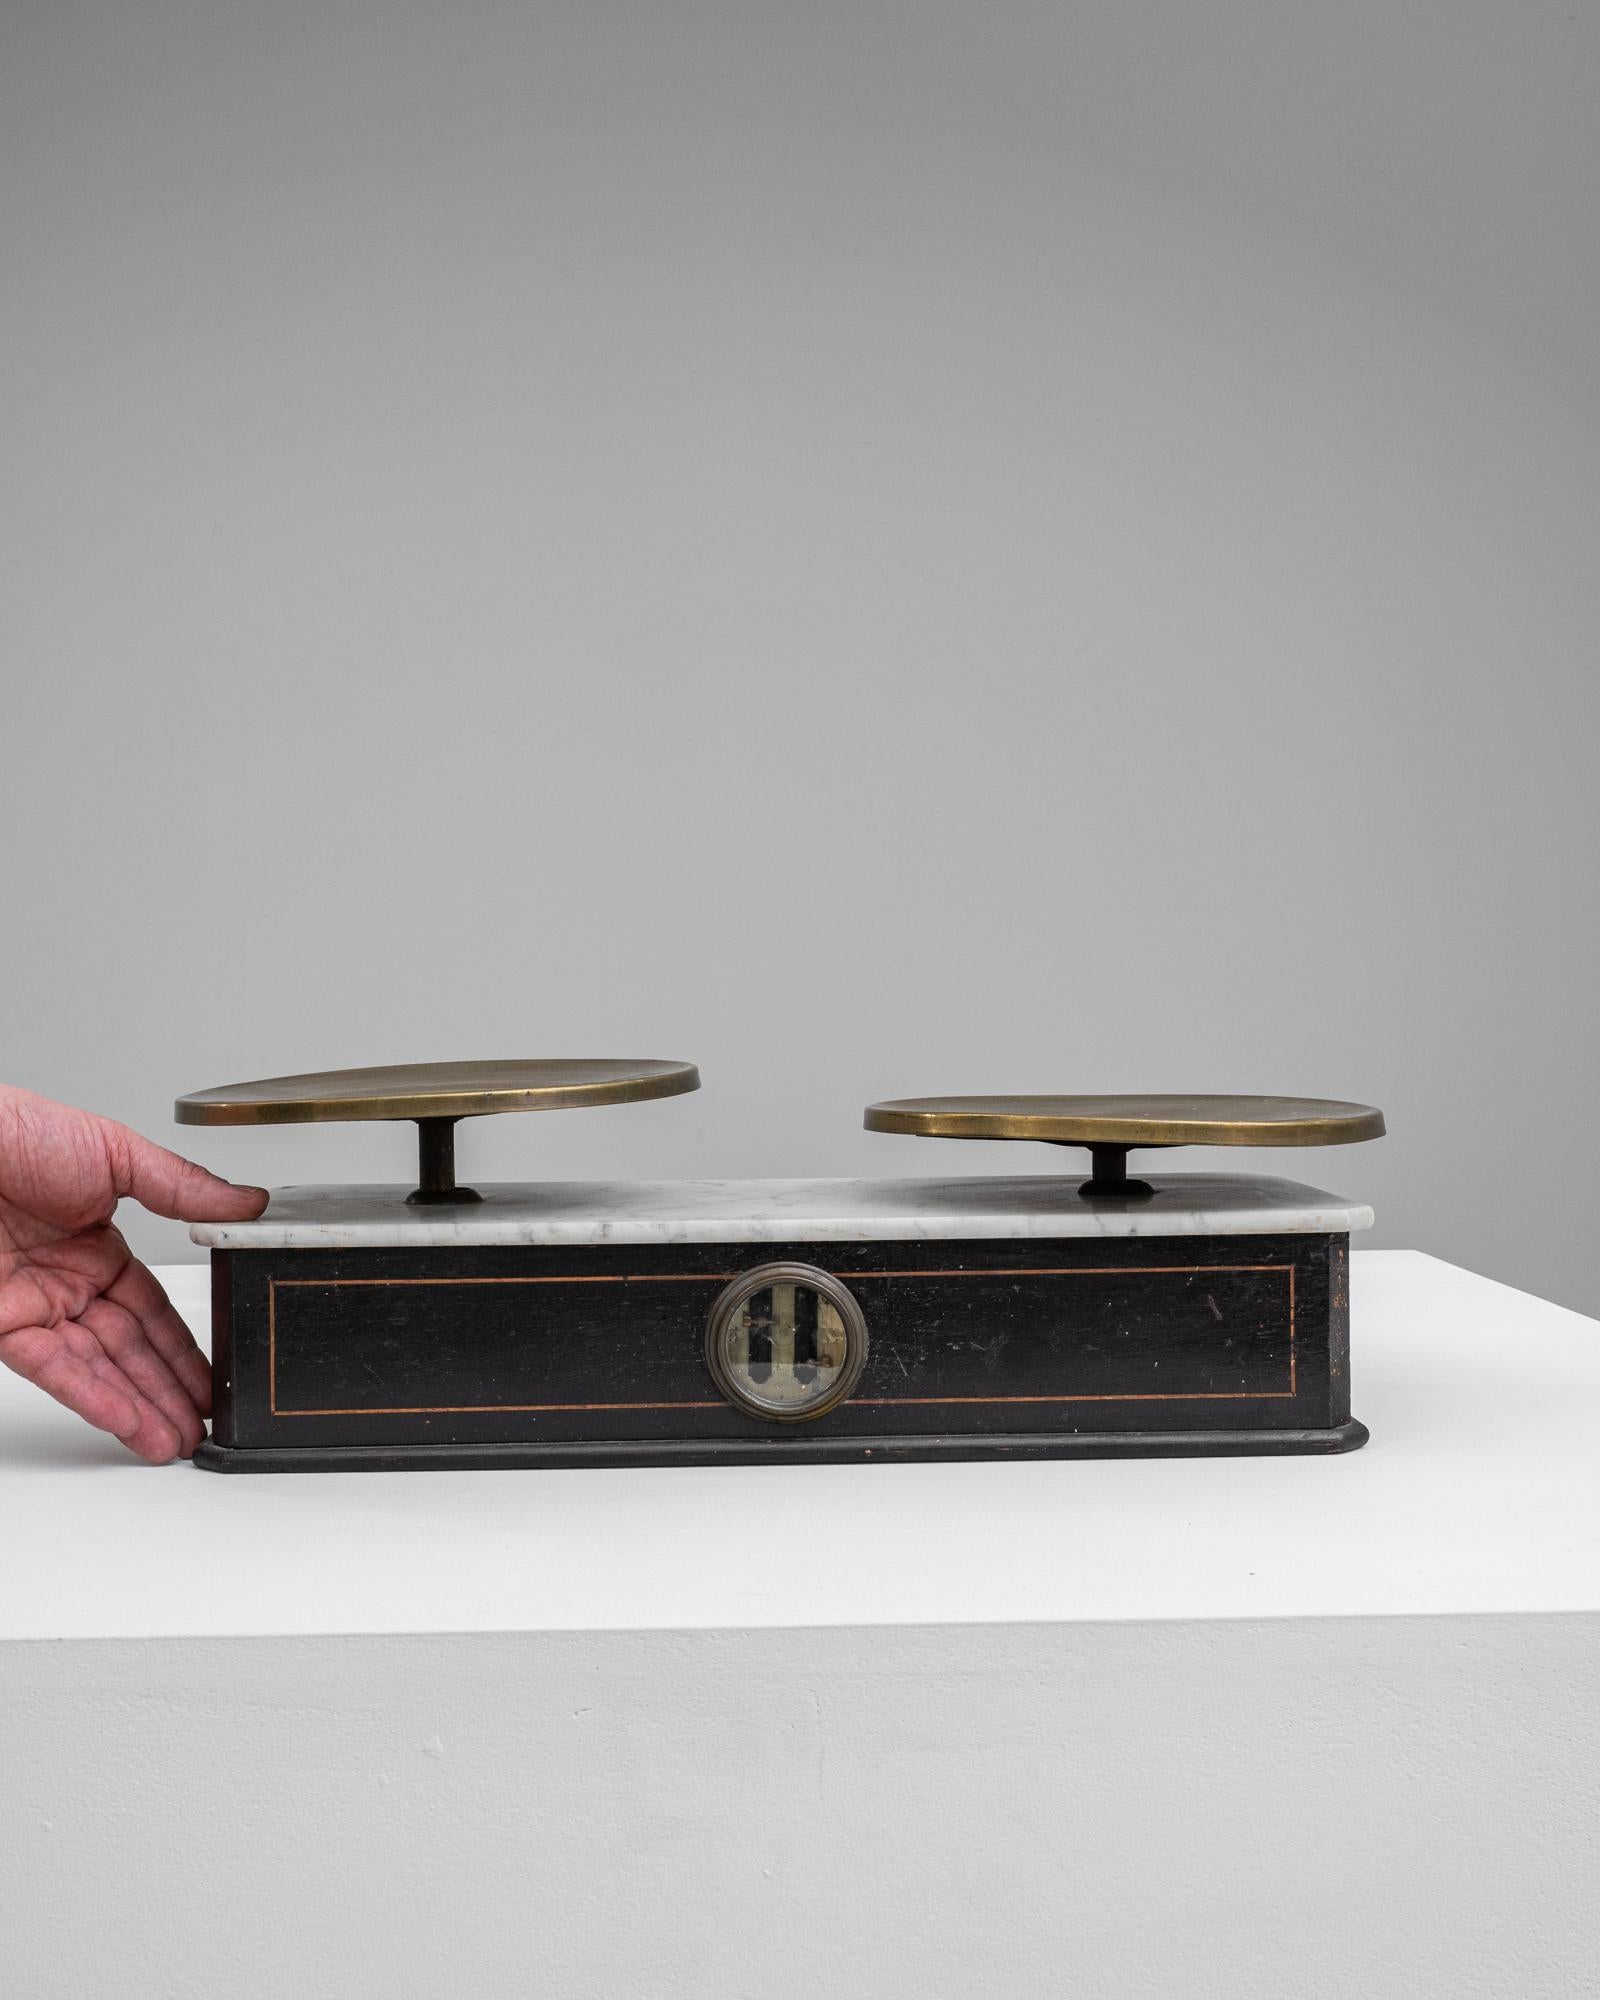 This 19th Century French Wooden & Metal Scale presents a stunning juxtaposition of elegance and precision. Its sleek wooden base, framed by delicate metal accents, provides a dignified stage for the polished brass pans that sit aloft. The central